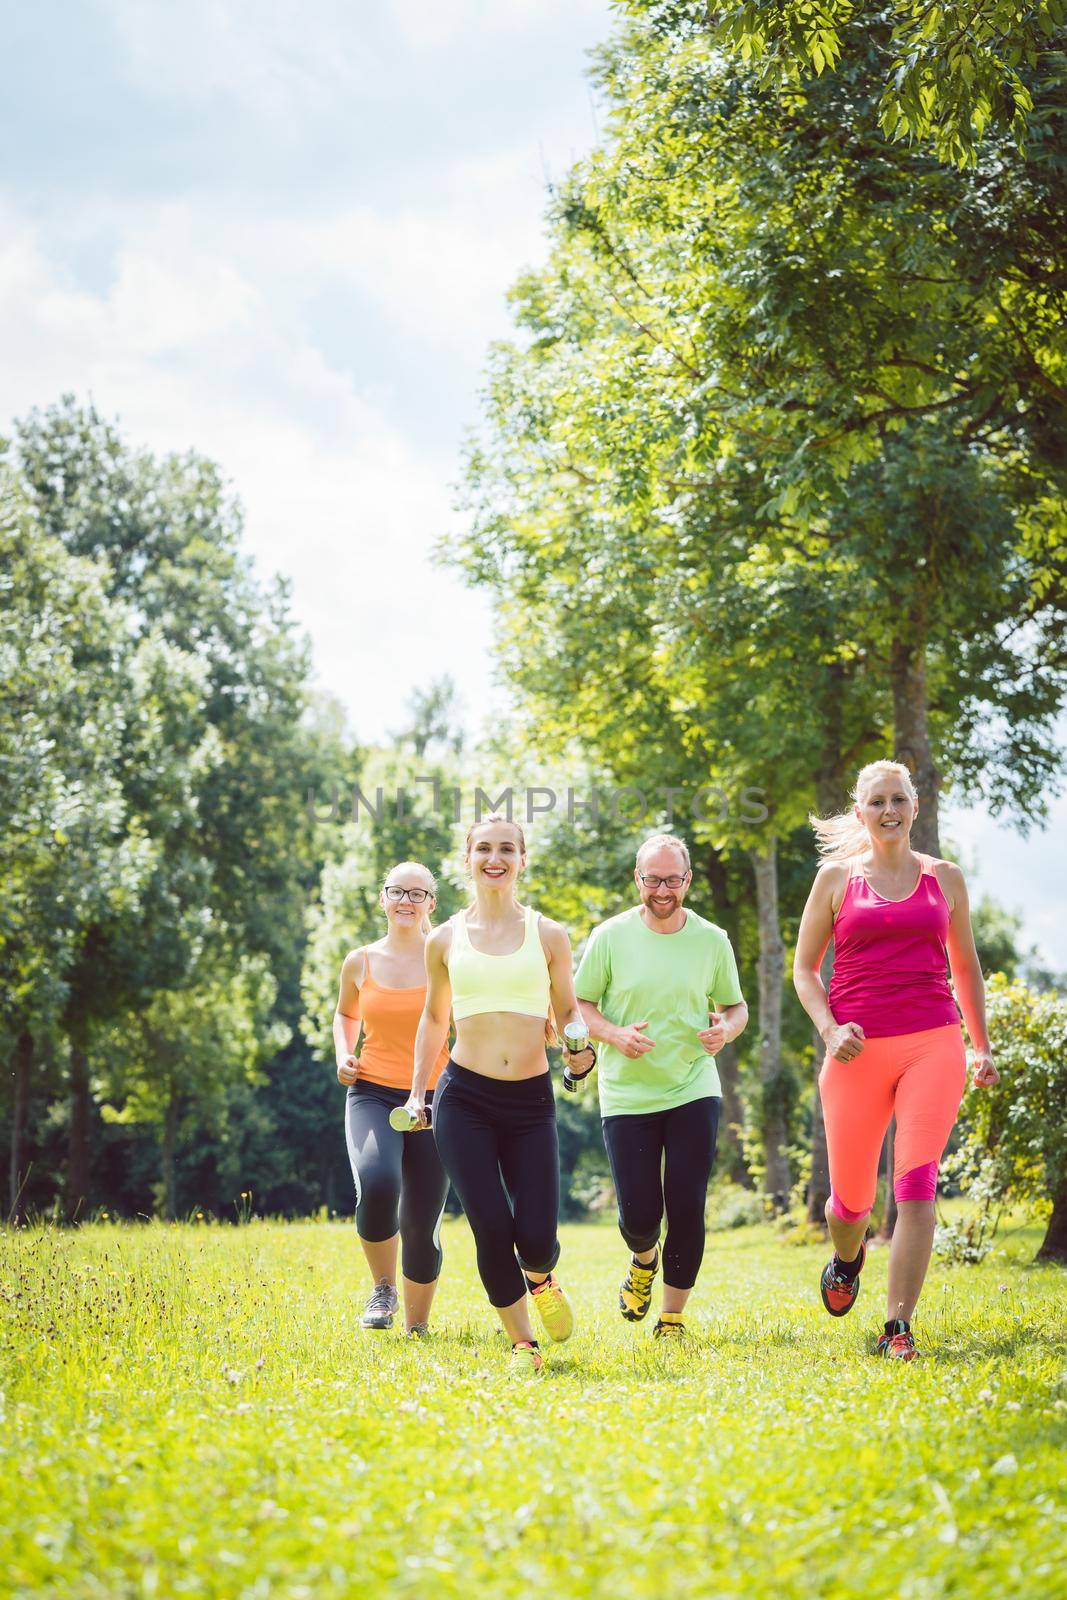 Family with personal Fitness Trainer jogging by Kzenon